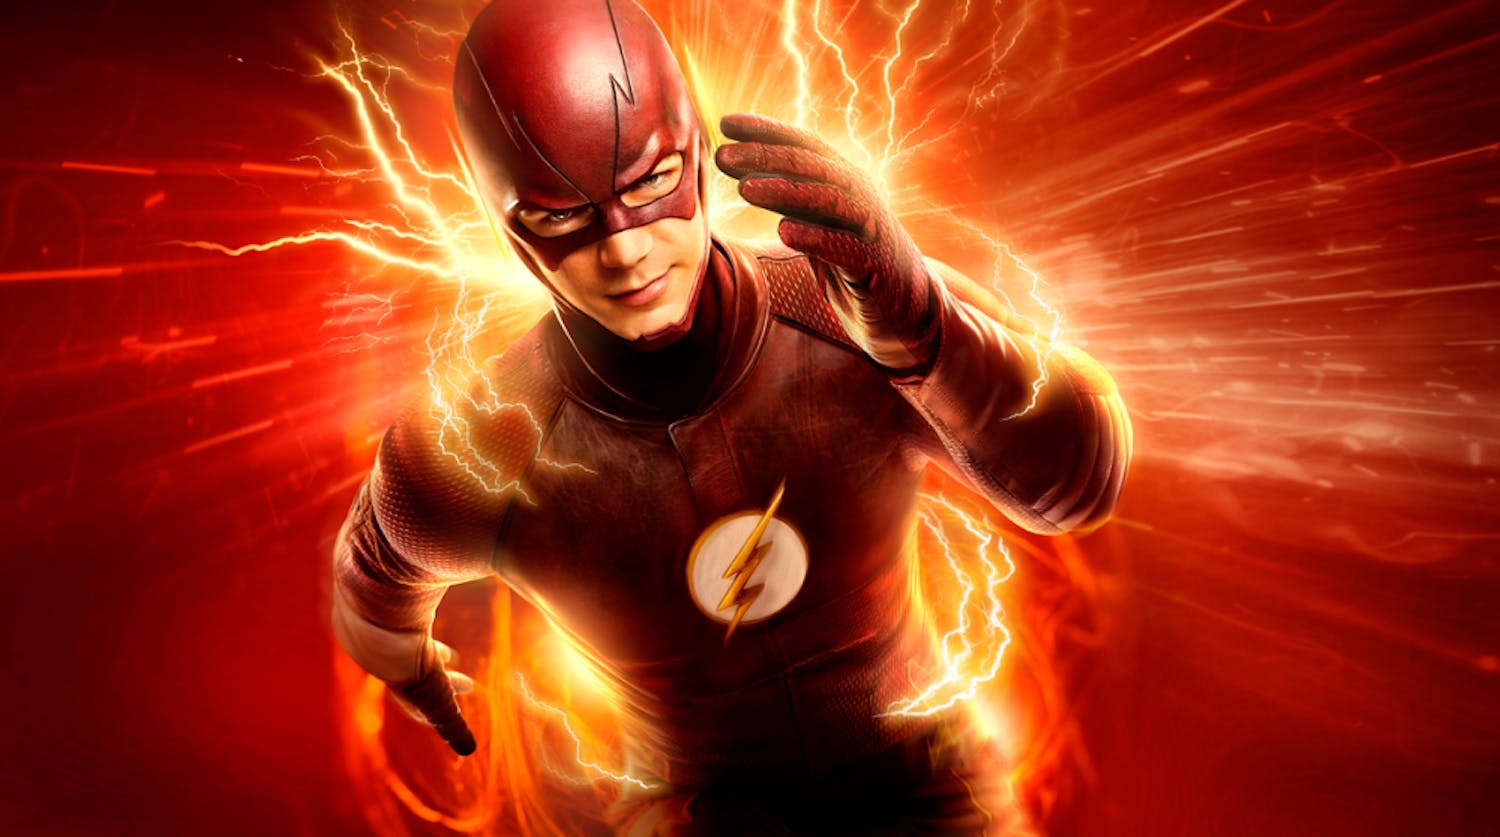 "The Flash"&nbsp;returns to The CW&nbsp;on Tuesday, October 9 at 7 p.m.